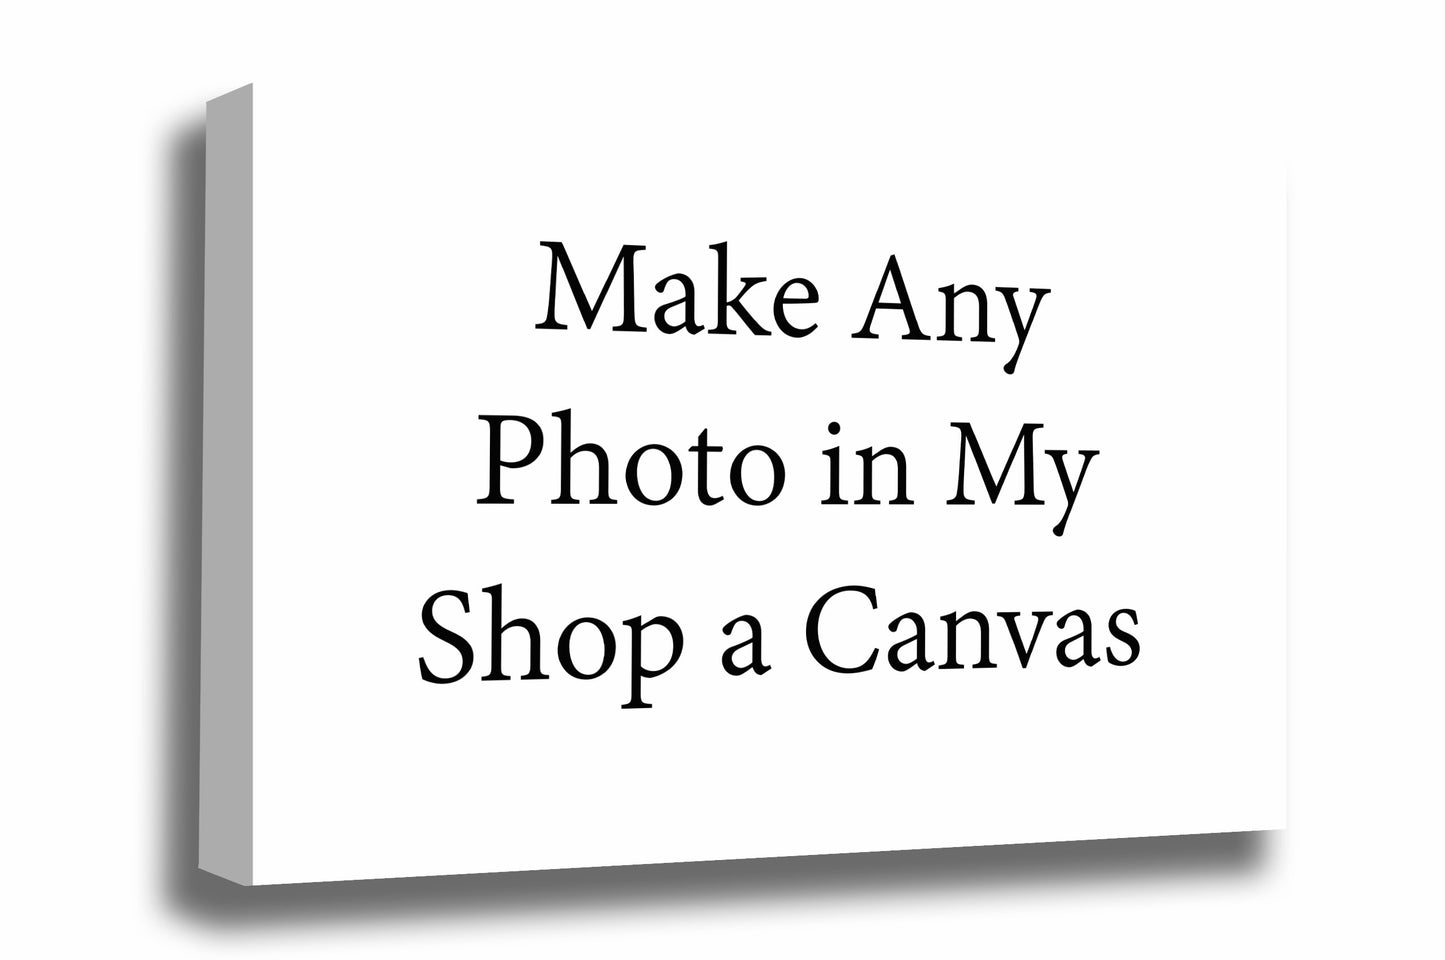 Make any image in the Southern Plains Photography store into a canvas.